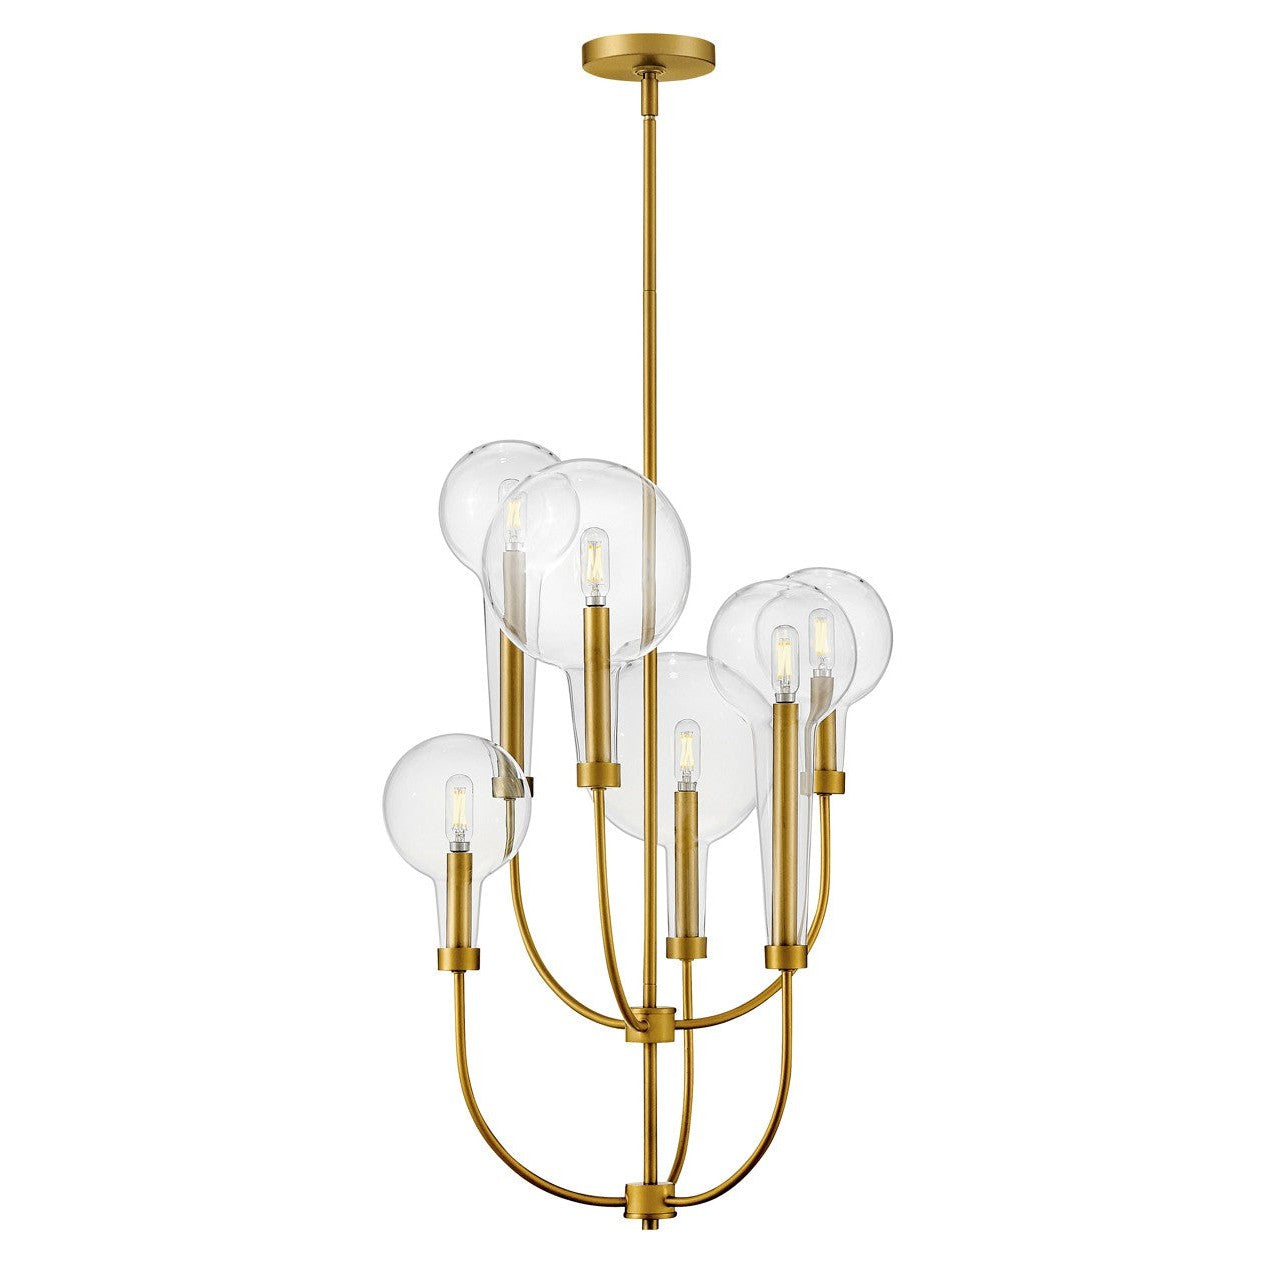 Hinkley Alchemy 30525LCB Gold Chandelier Light Fixture - Lacquered Brass